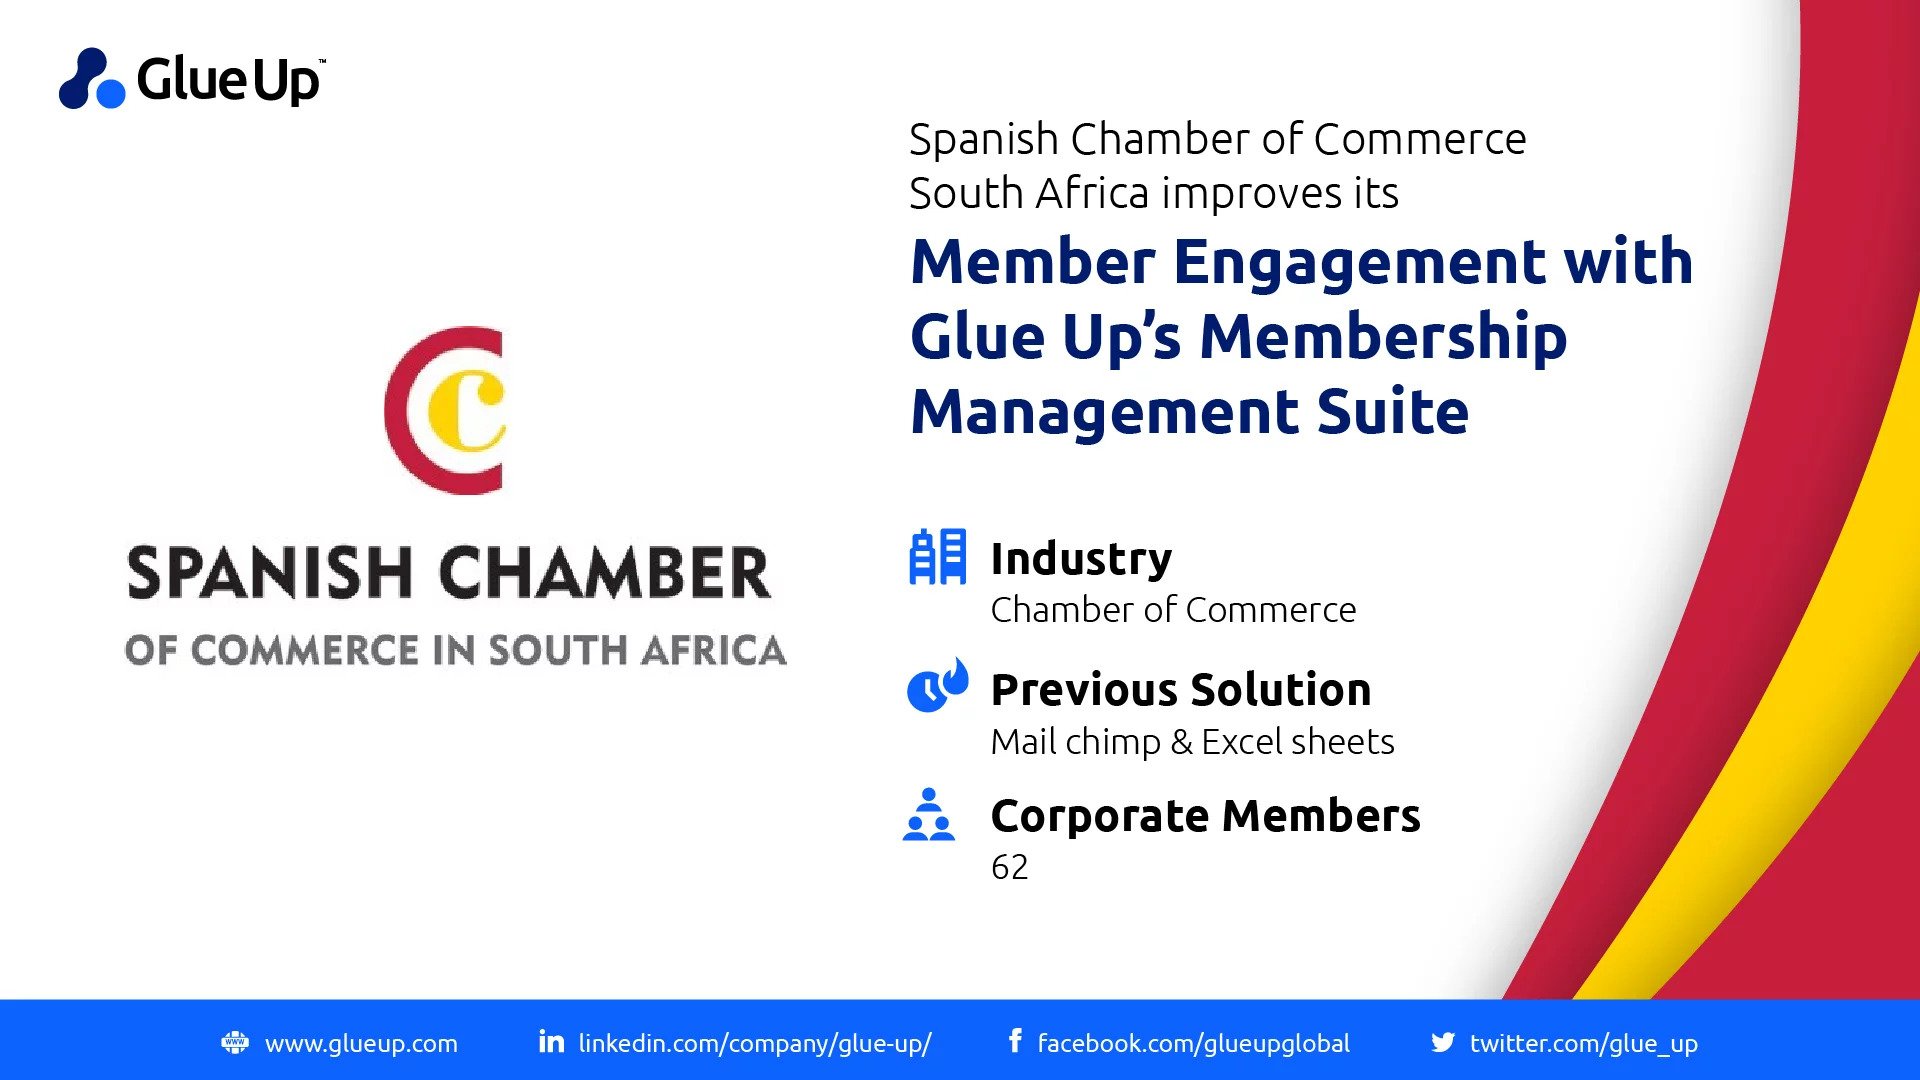 Spanish Chamber of Commerce improves it's member's engagement with Glue Up's Membership Management Suite 